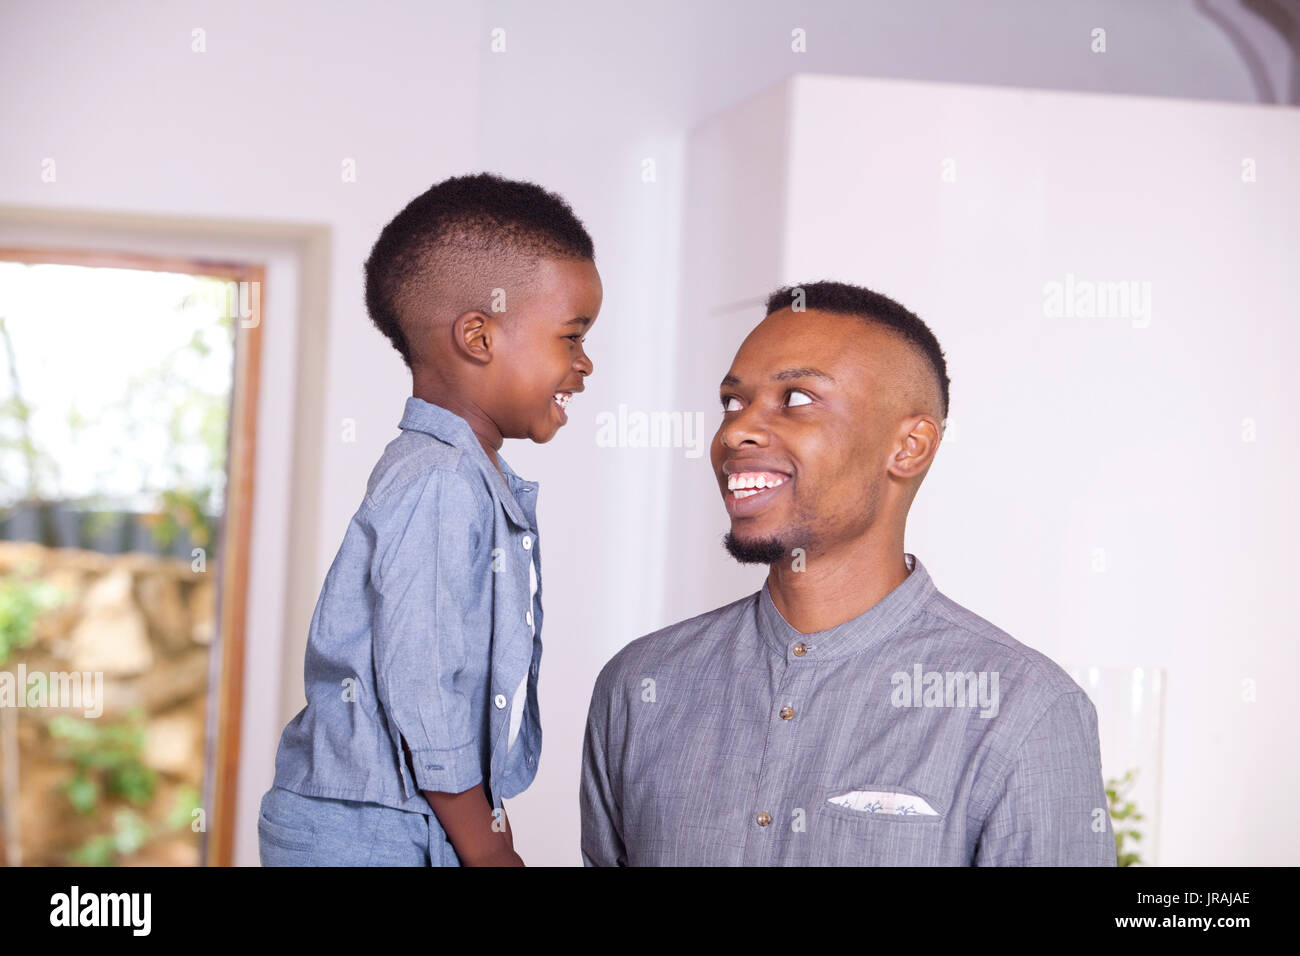 Father and son smiling Stock Photo